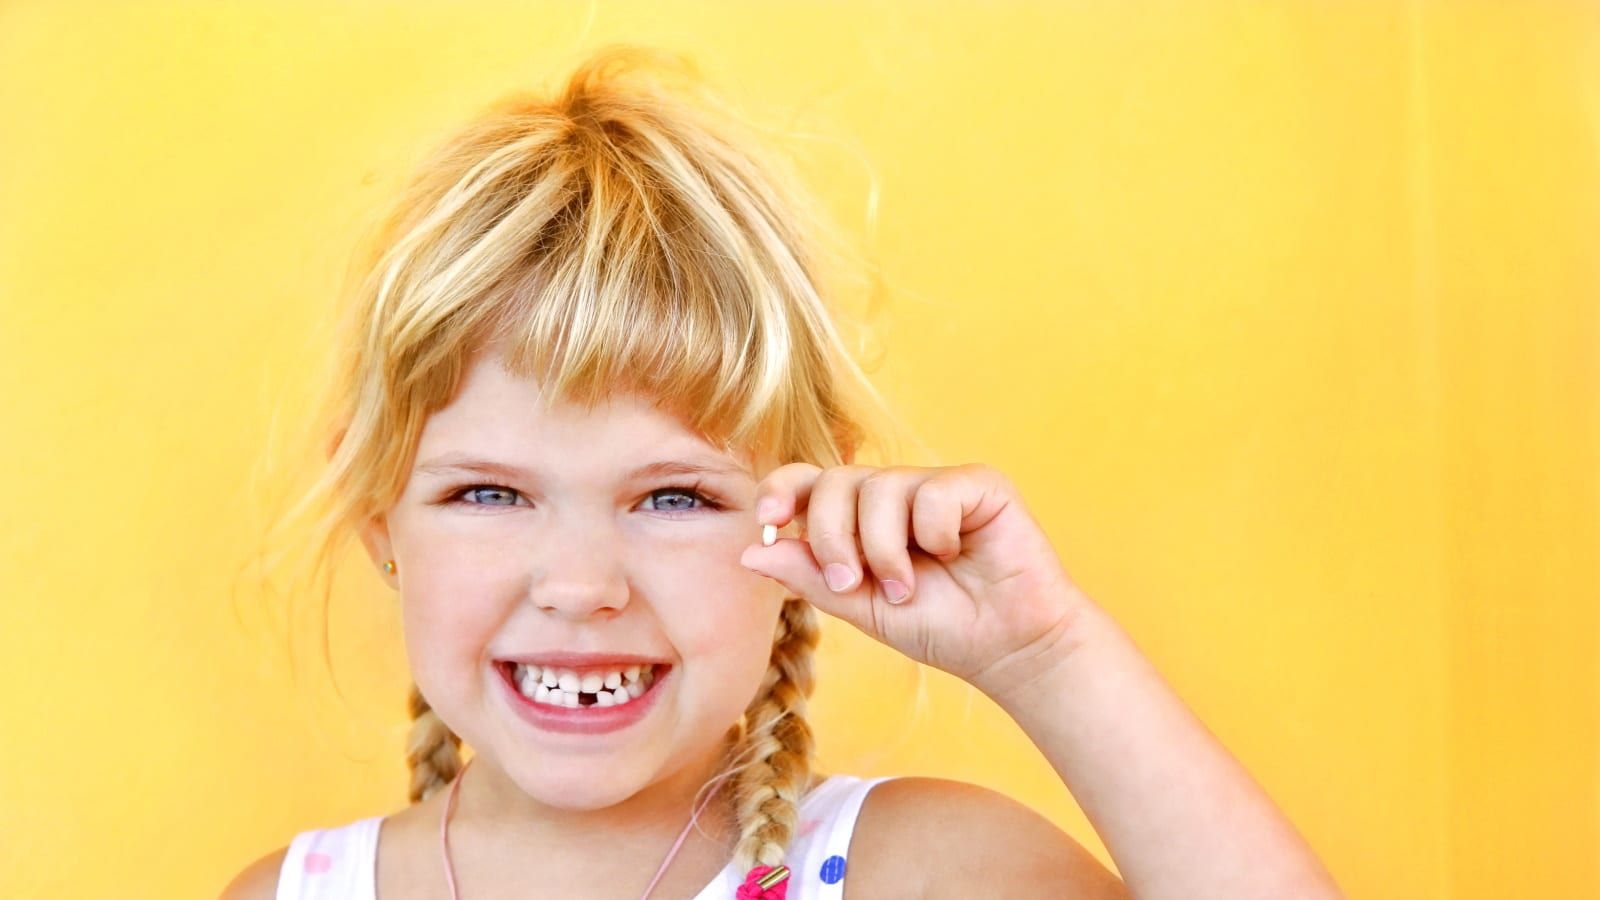 Child holding a baby tooth